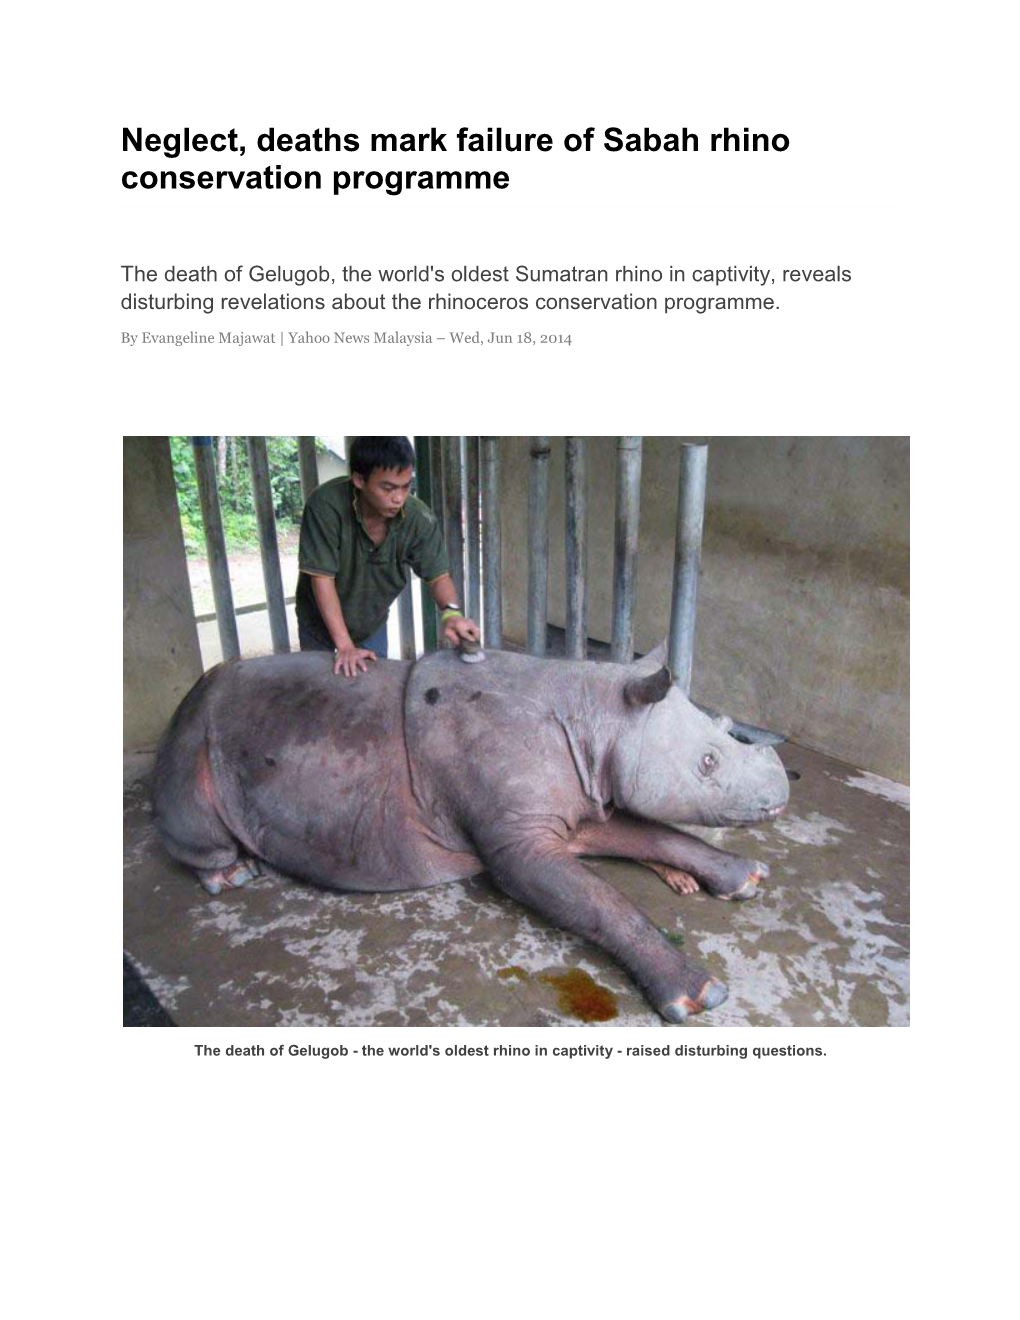 Neglect, Deaths Mark Failure of Sabah Rhino Conservation Programme